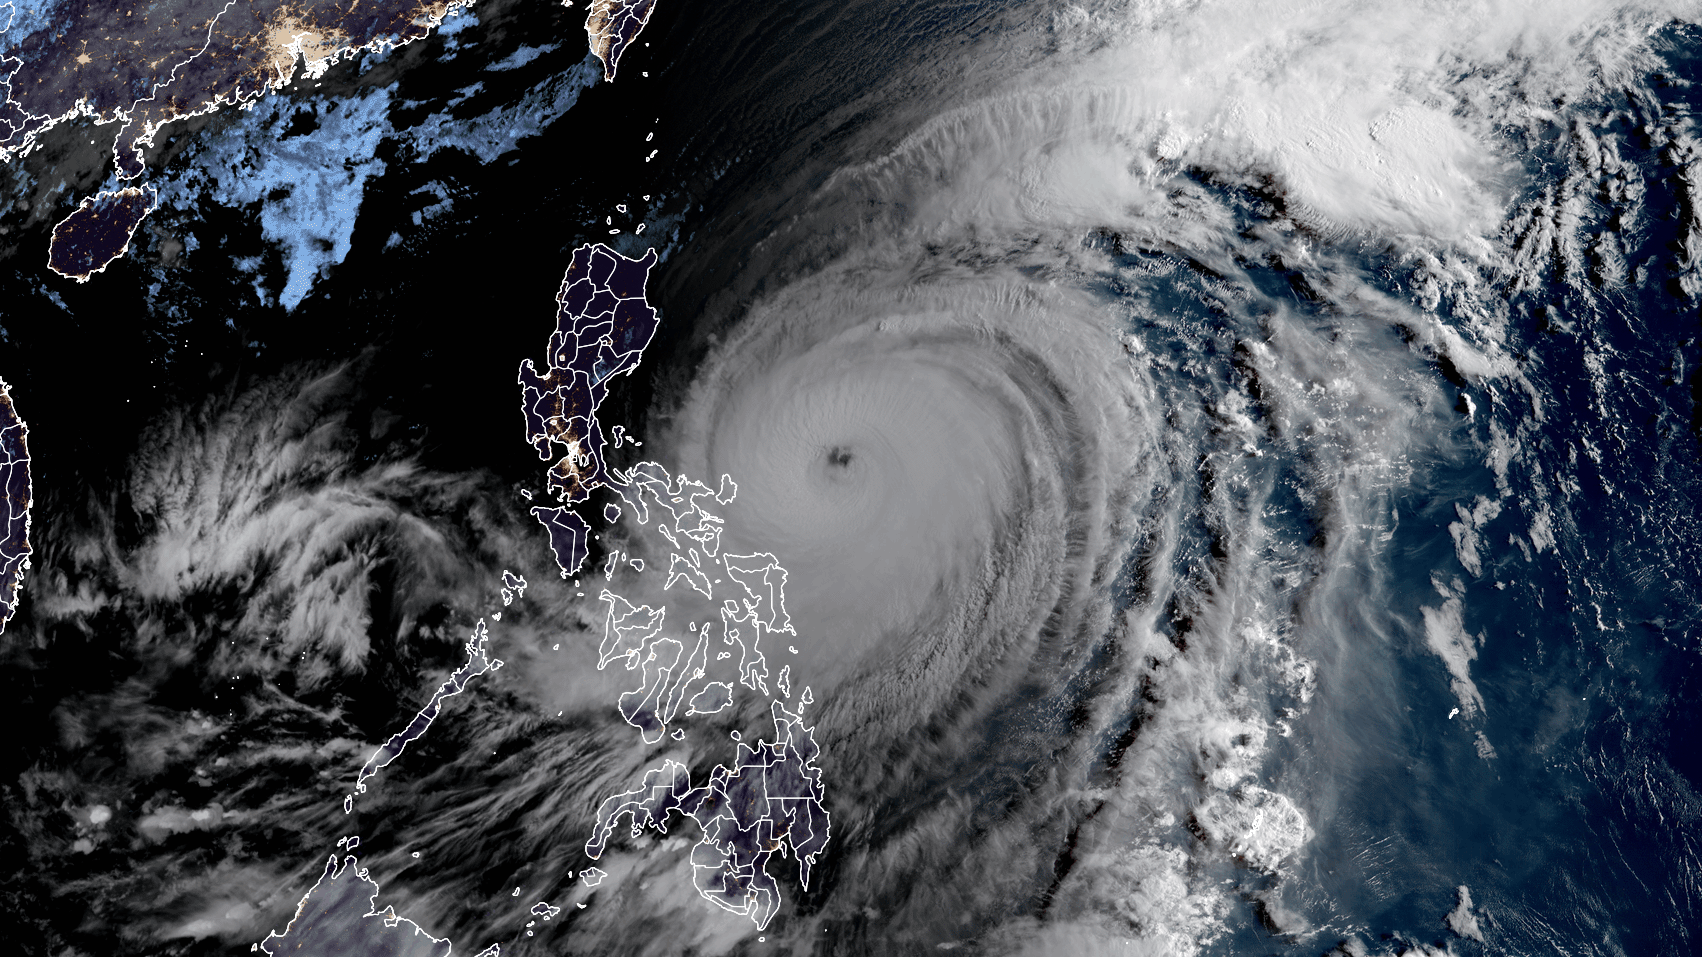 DNB imagery of Typhoon Surigae on April 19, 2021 in Pacific Ocean